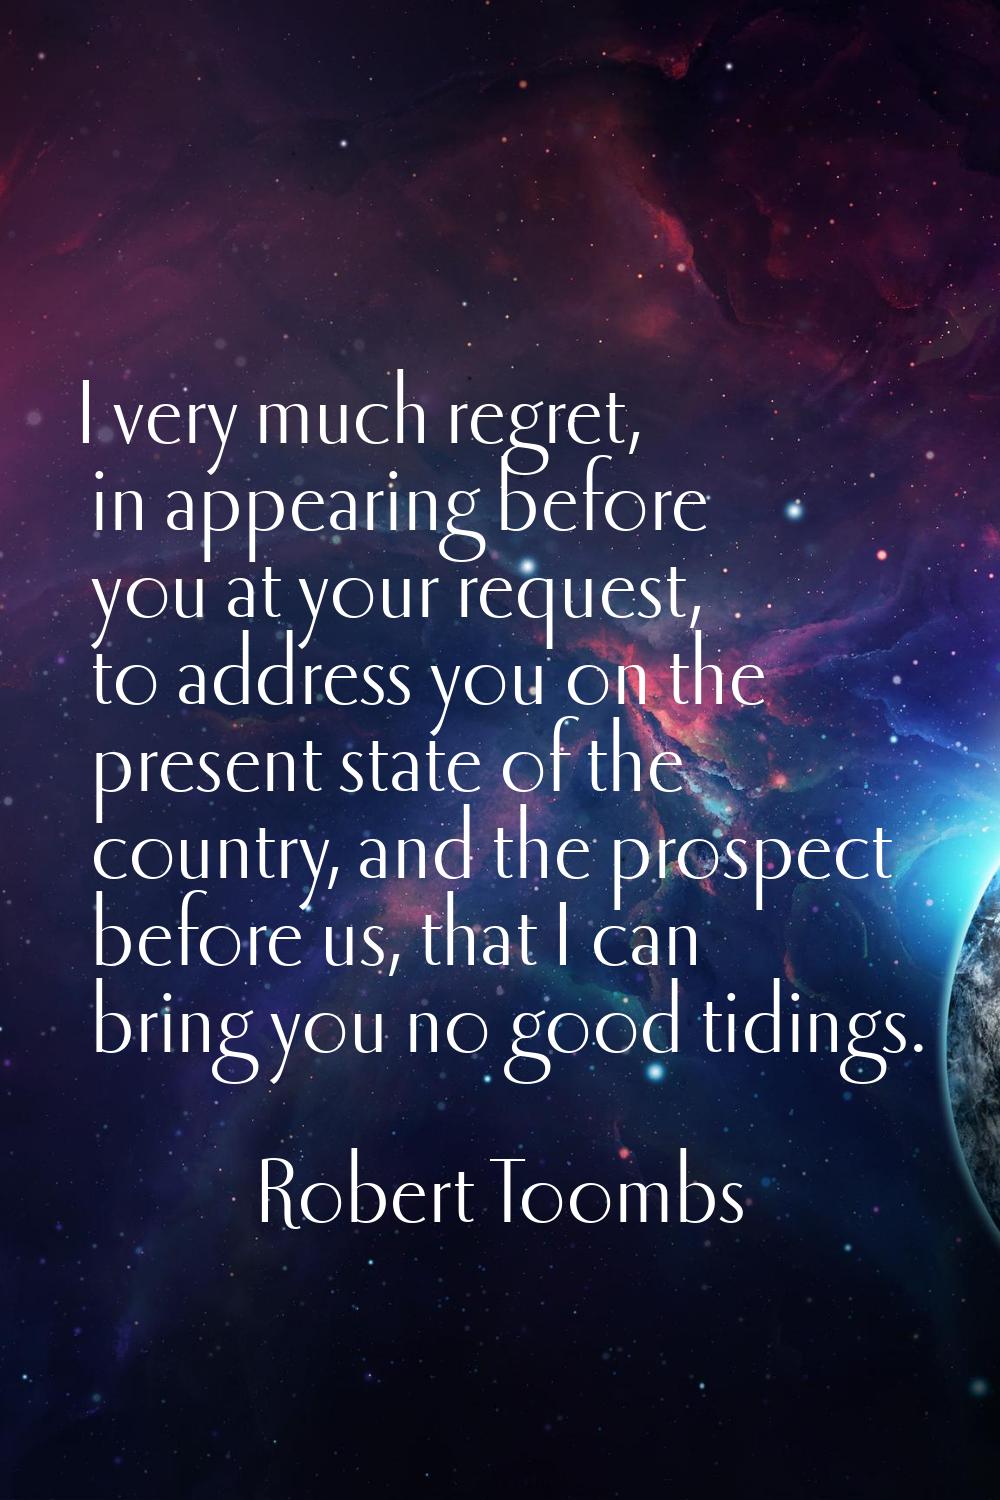 I very much regret, in appearing before you at your request, to address you on the present state of